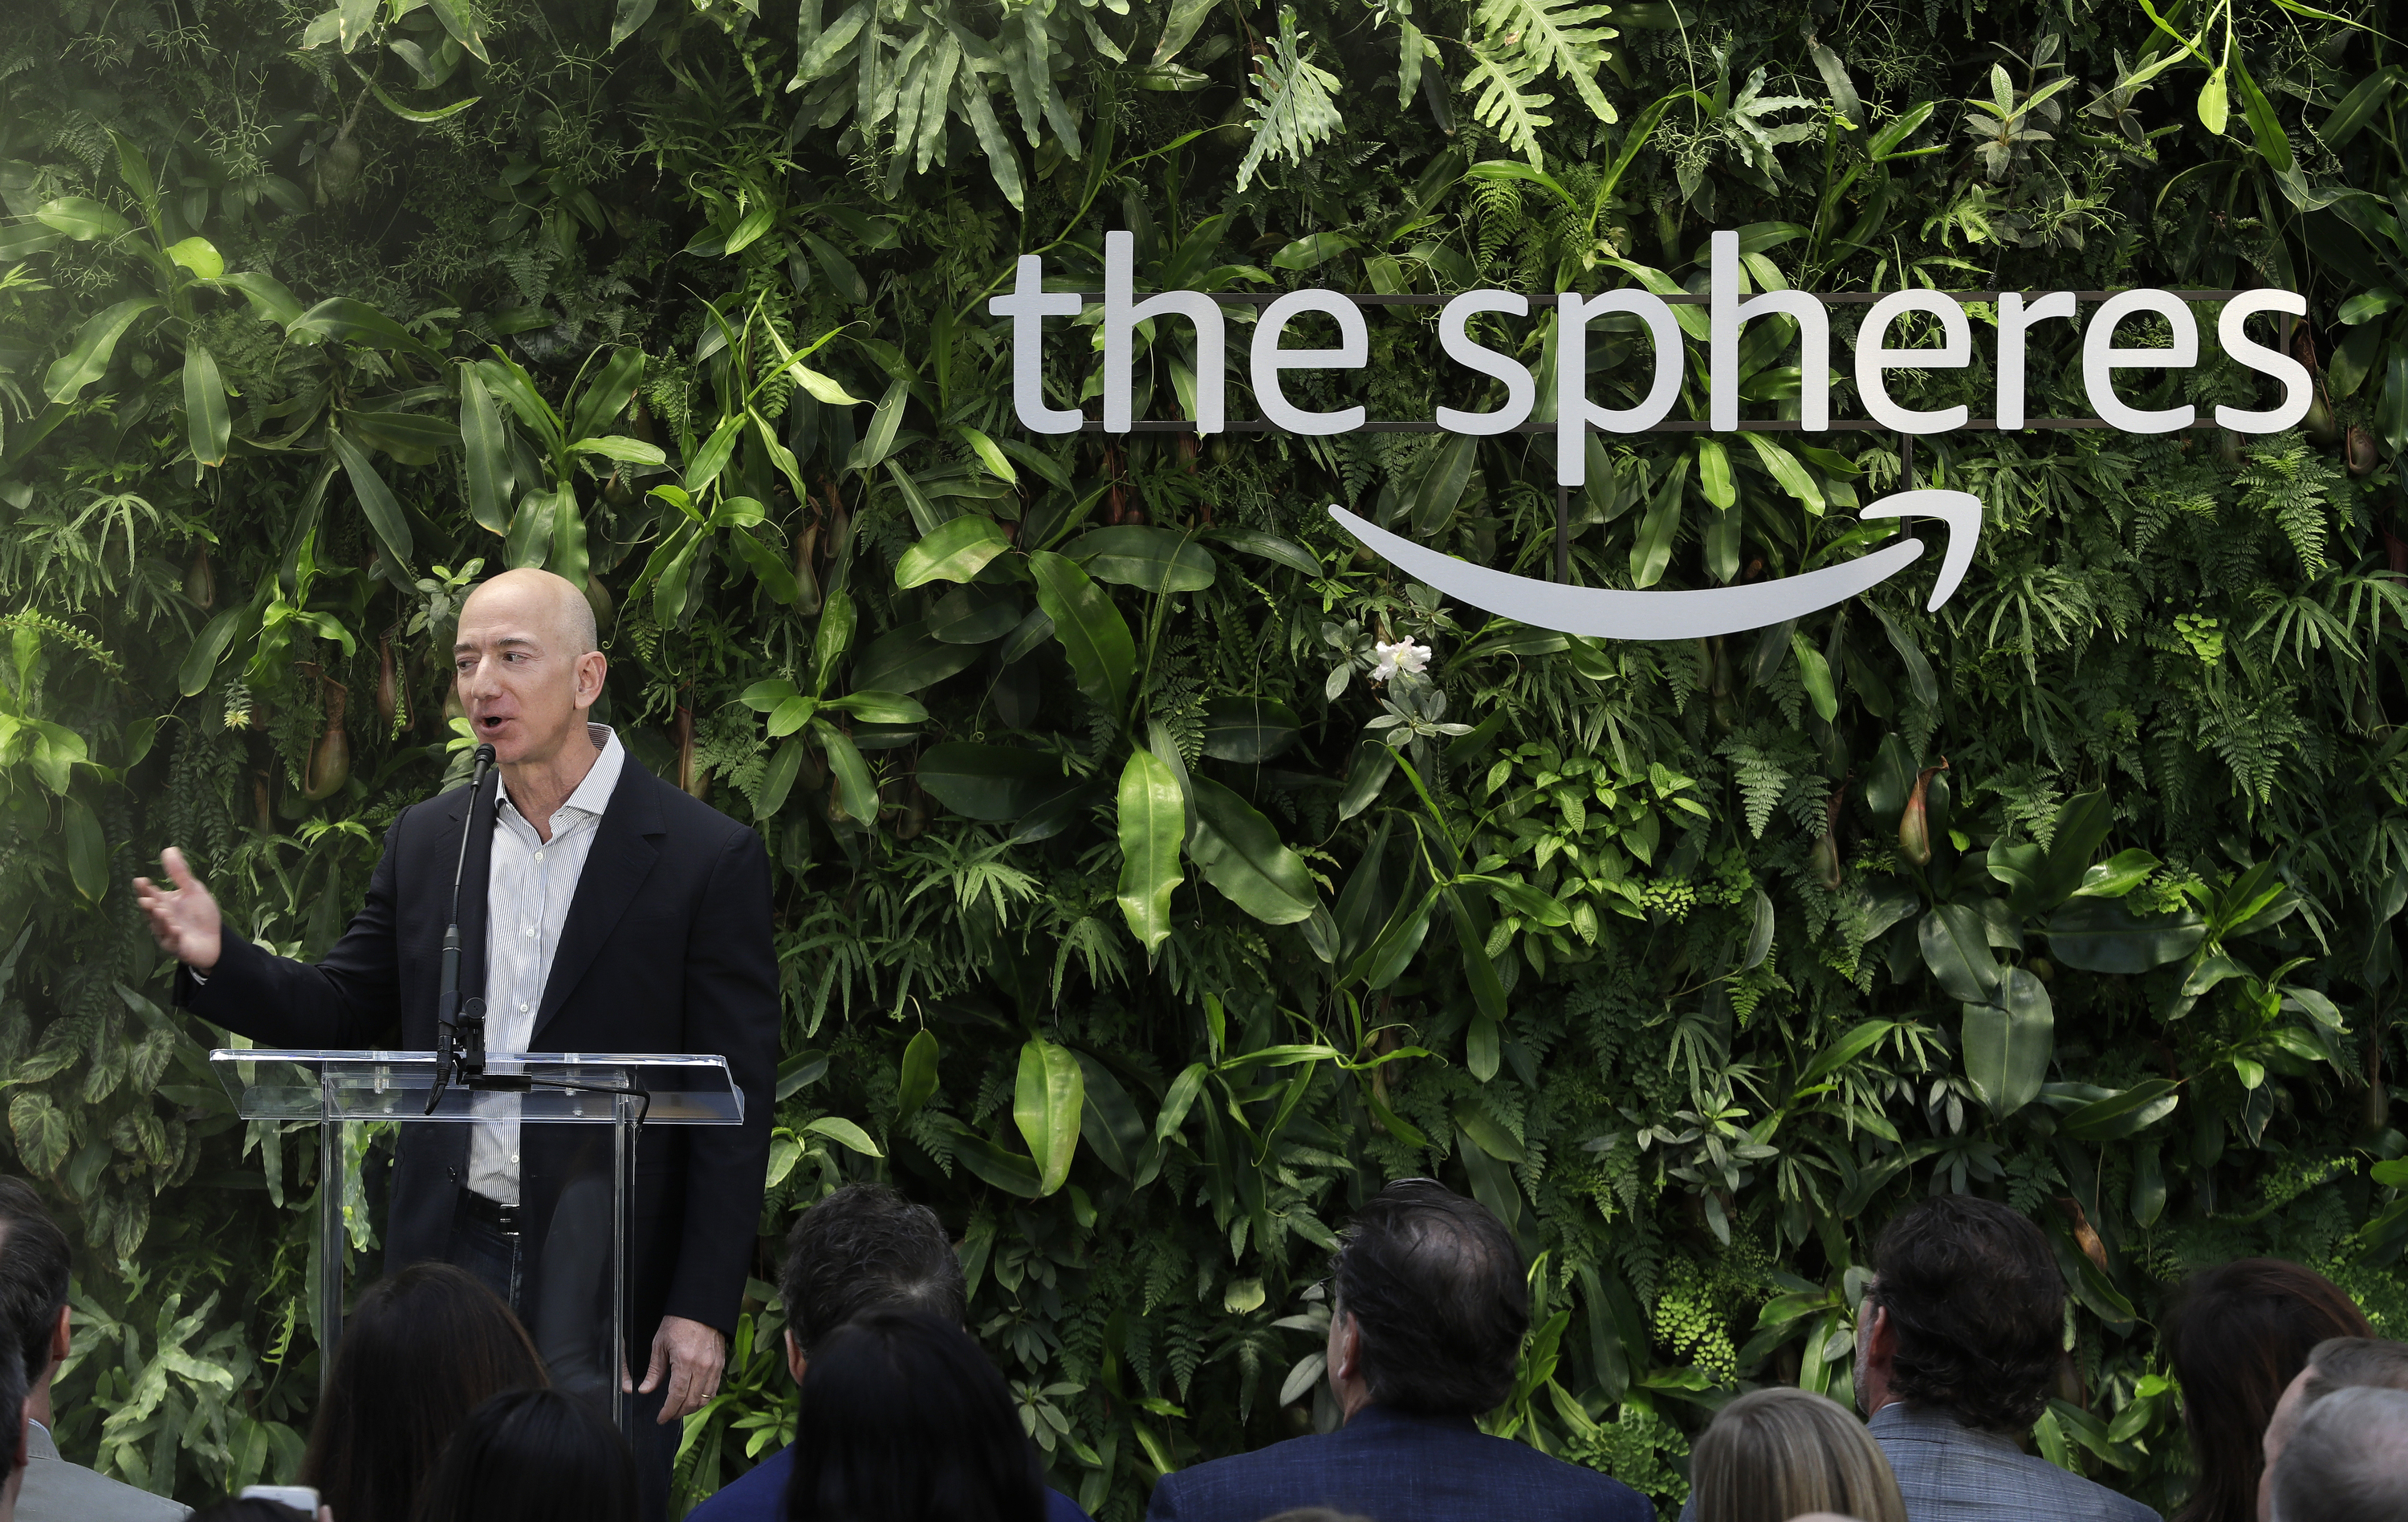 Jeff Bezos, the CEO and founder of Amazon.com, speaks during the grand opening of the Amazon Spheres in Seattle